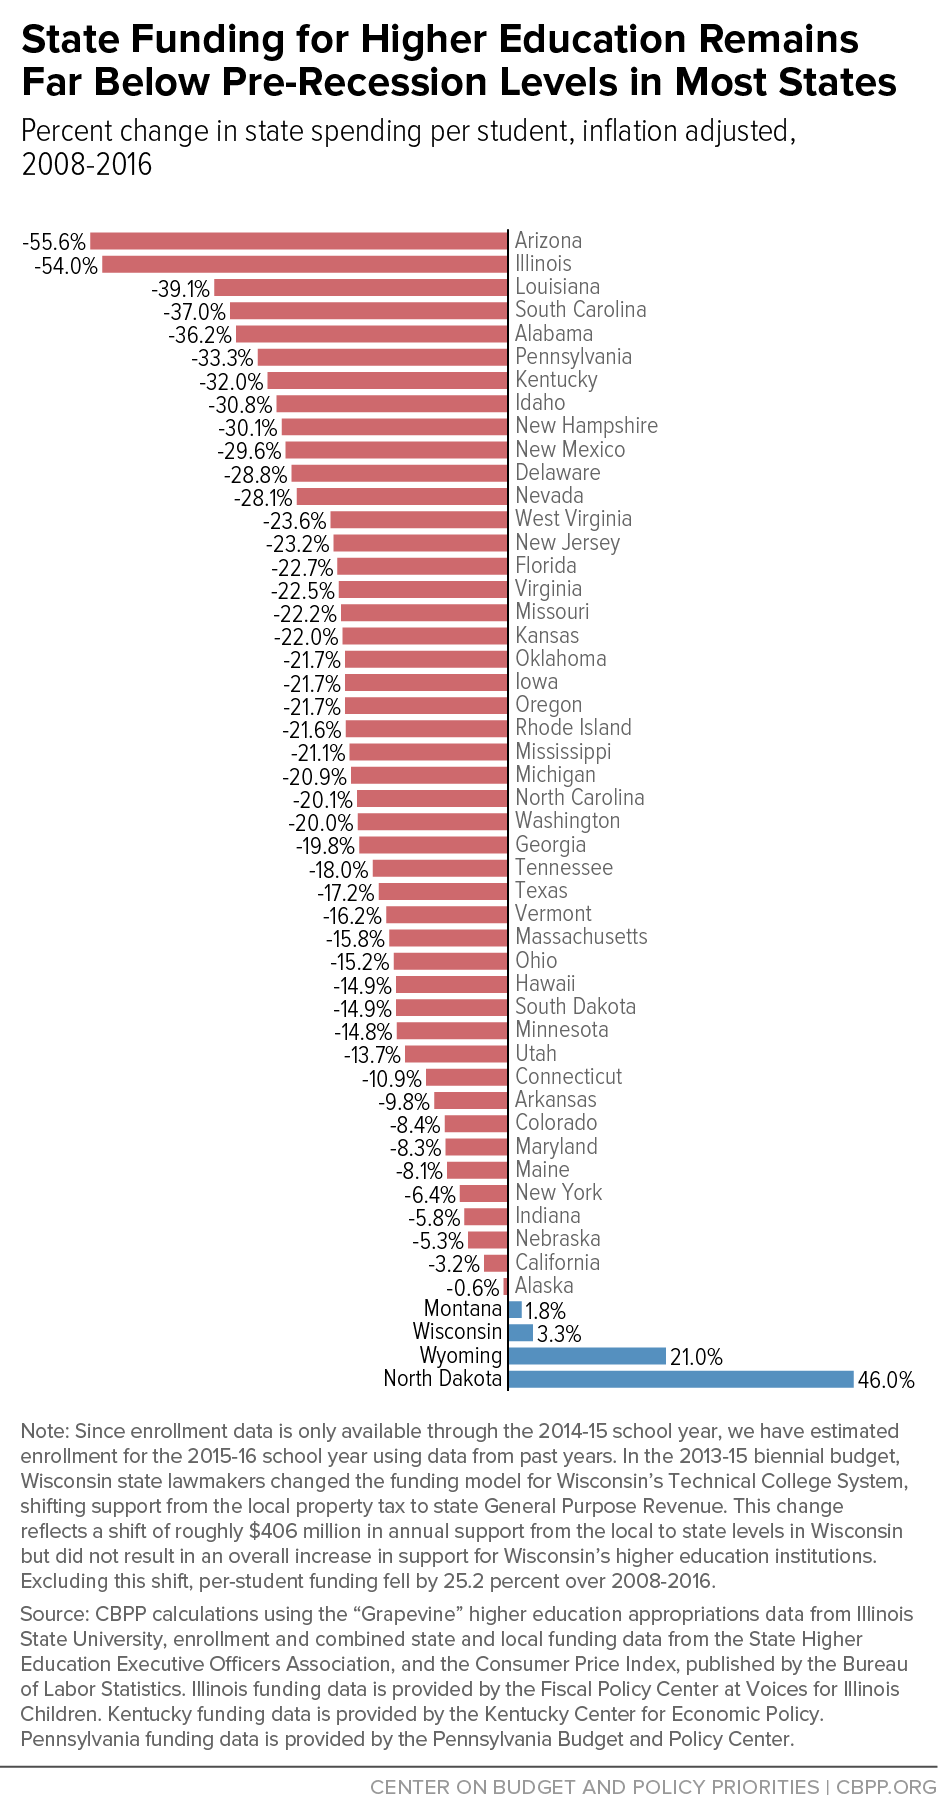 State Funding for Higher Education Remains Far Below Pre-Recession Levels in Most States